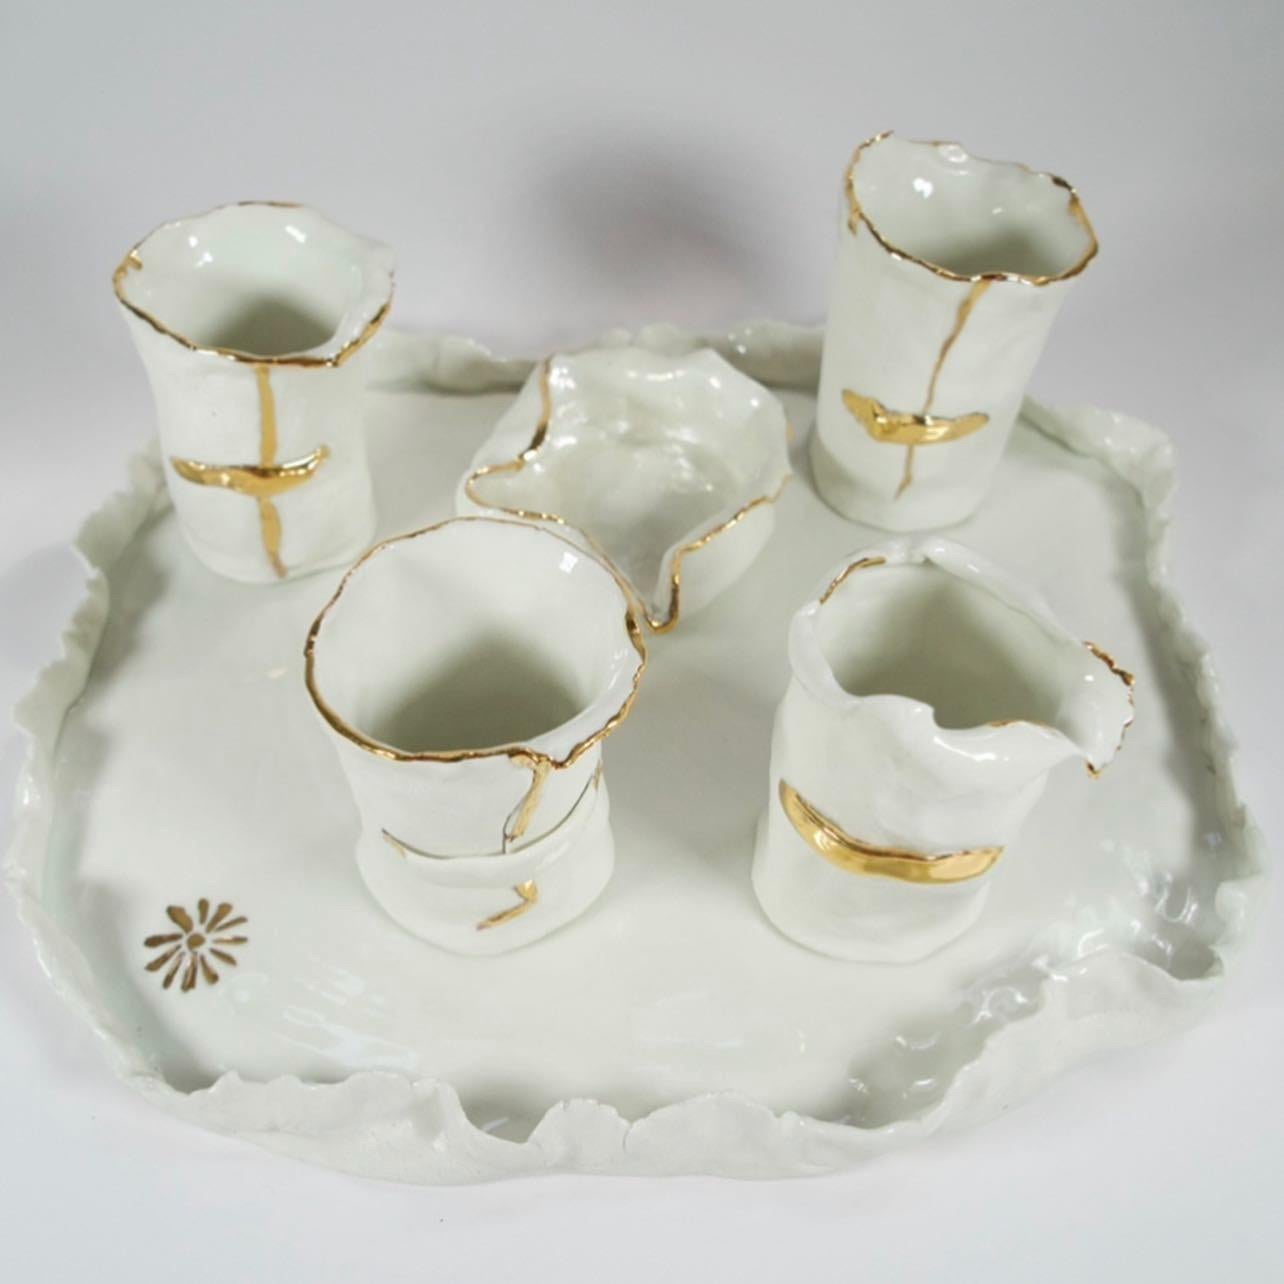 A very special coffee set in white porcelain and gold. This art piece is unique and signed by the artist Hania Jneid. It could be decorative or functional, It is hand built and hand glazed and gold lustred. 